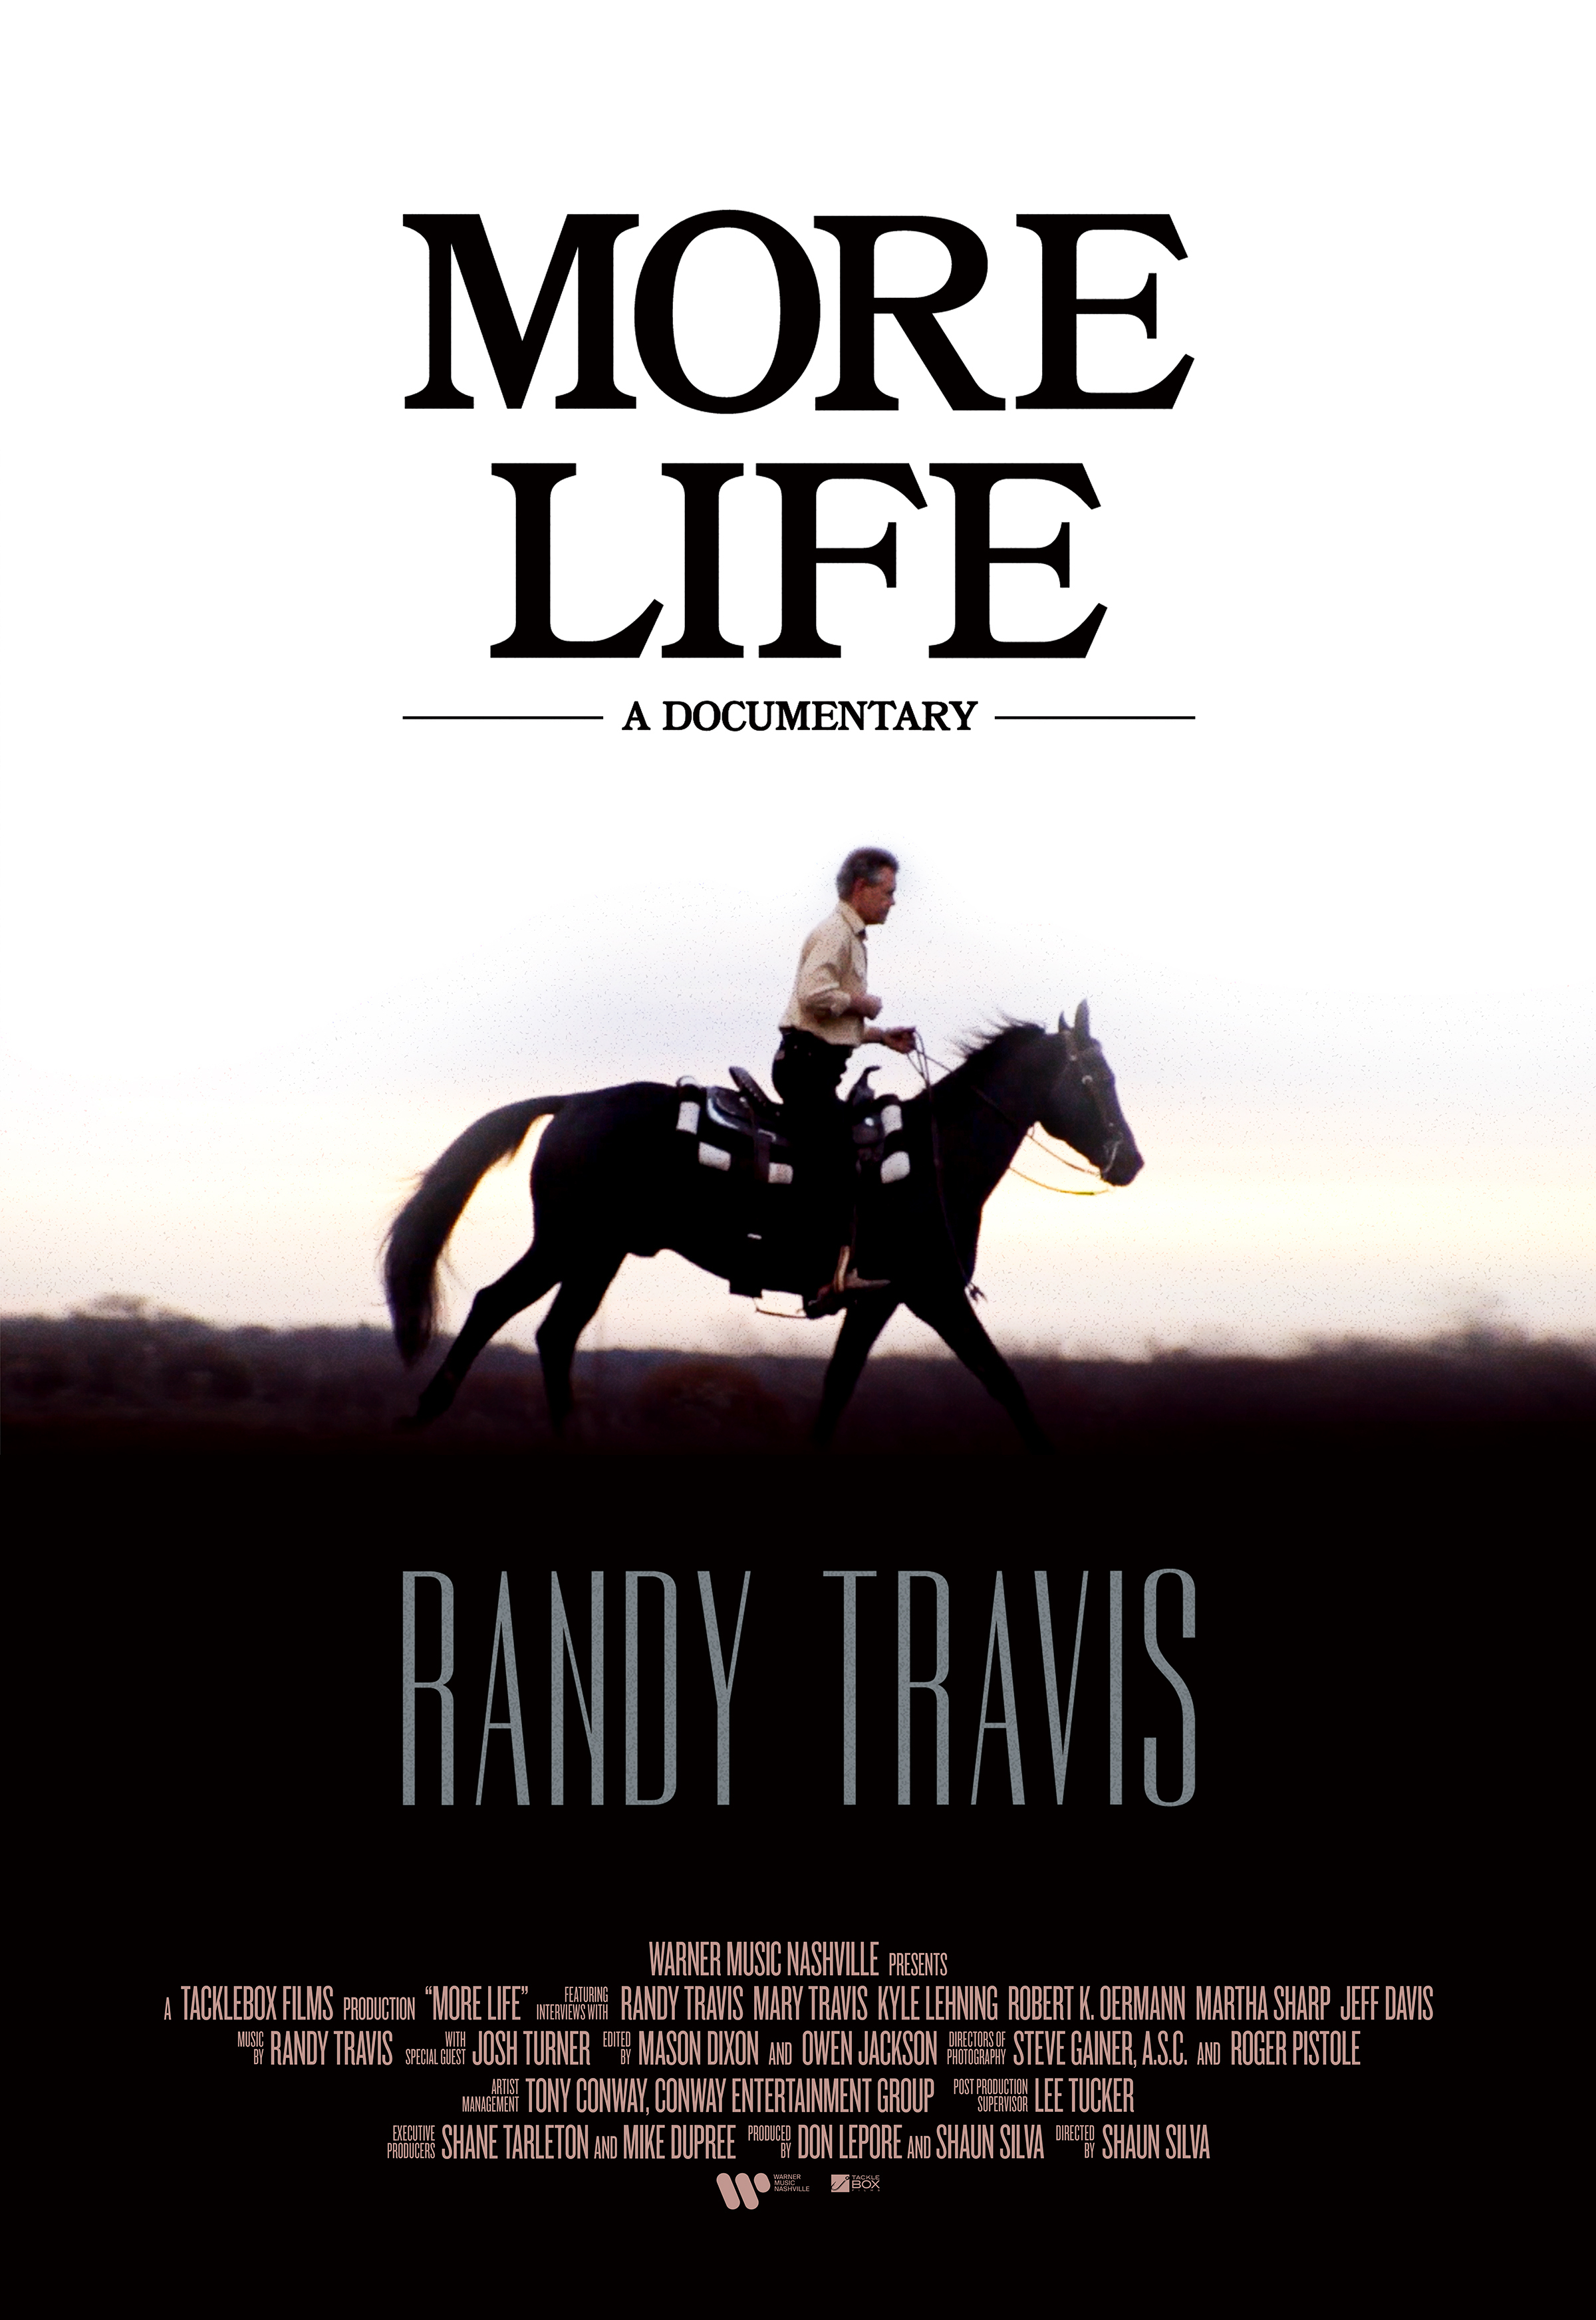 Randy Travis’ Documentary "More Life" Premieres Tonight on Circle Network